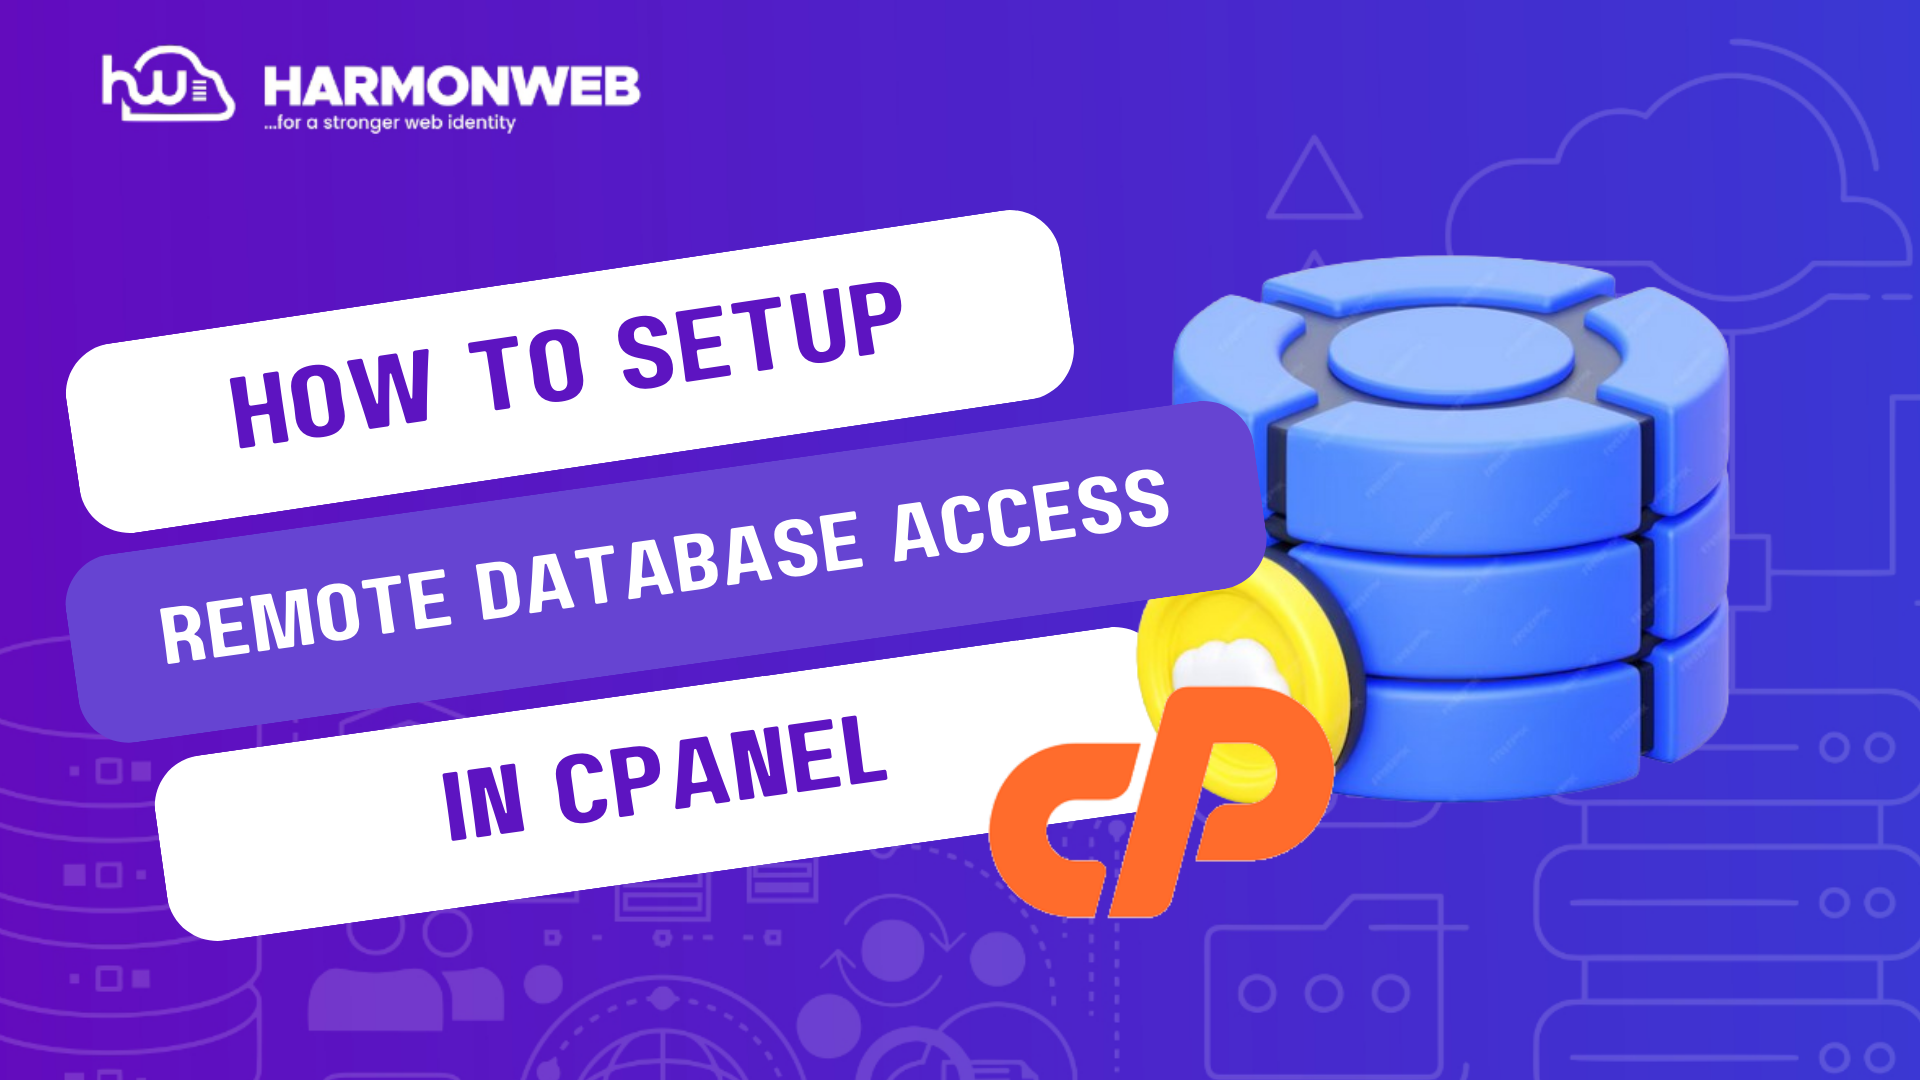 Remote Database Access in cPanel